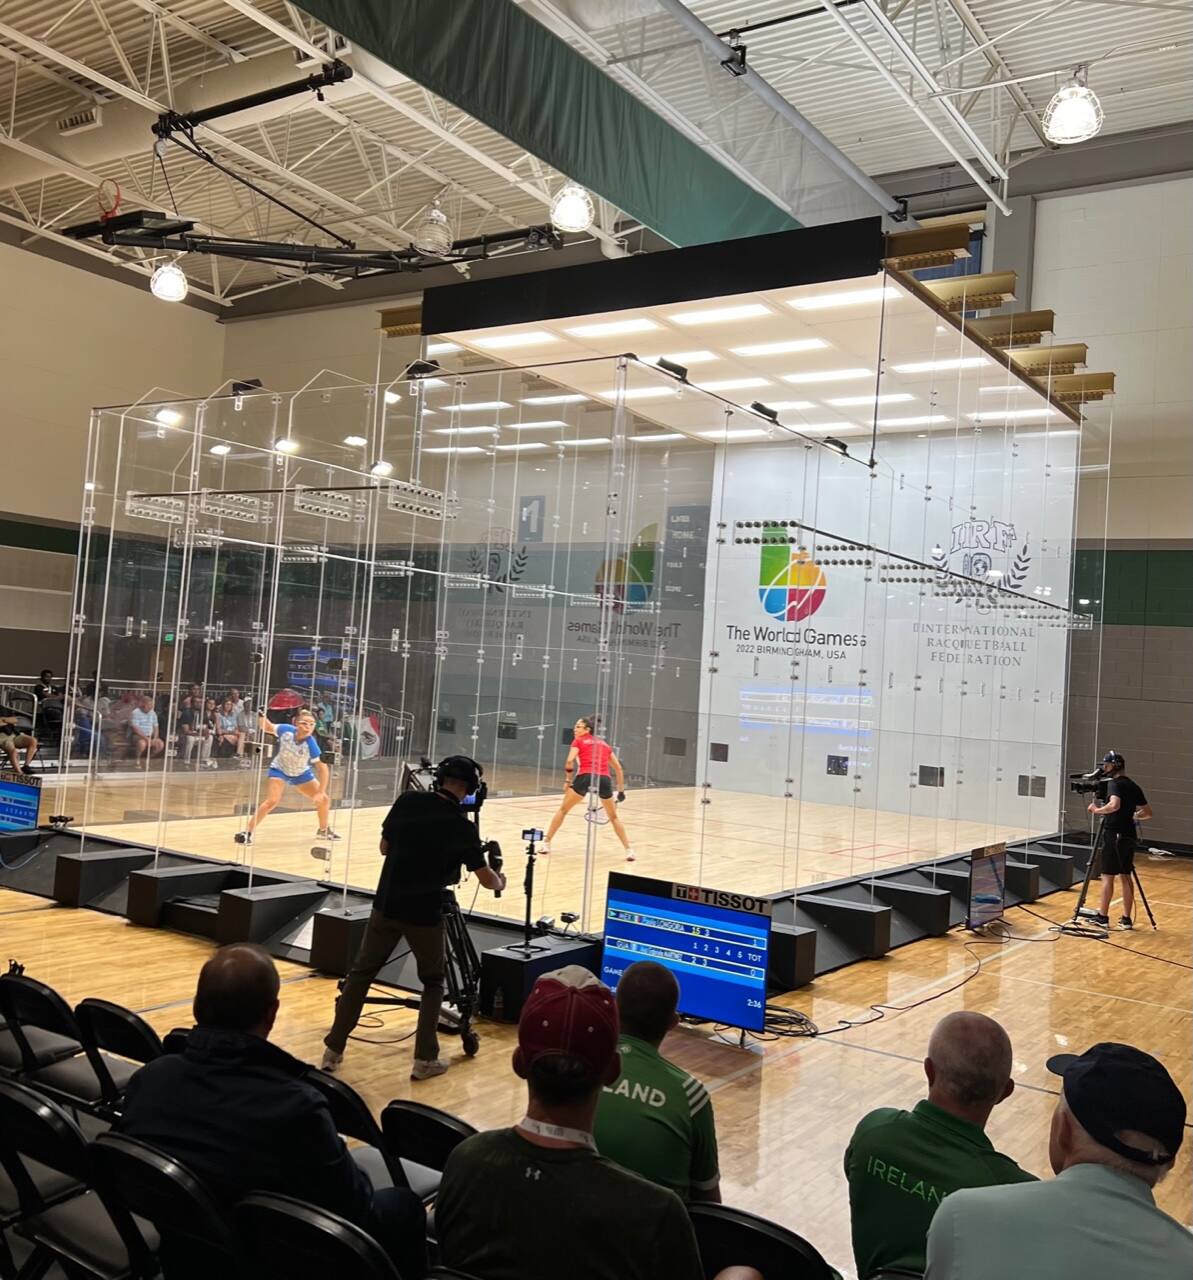 Women's Singles final featuring Paola Longoria vs. Gaby Martinez at the 2022 World Games